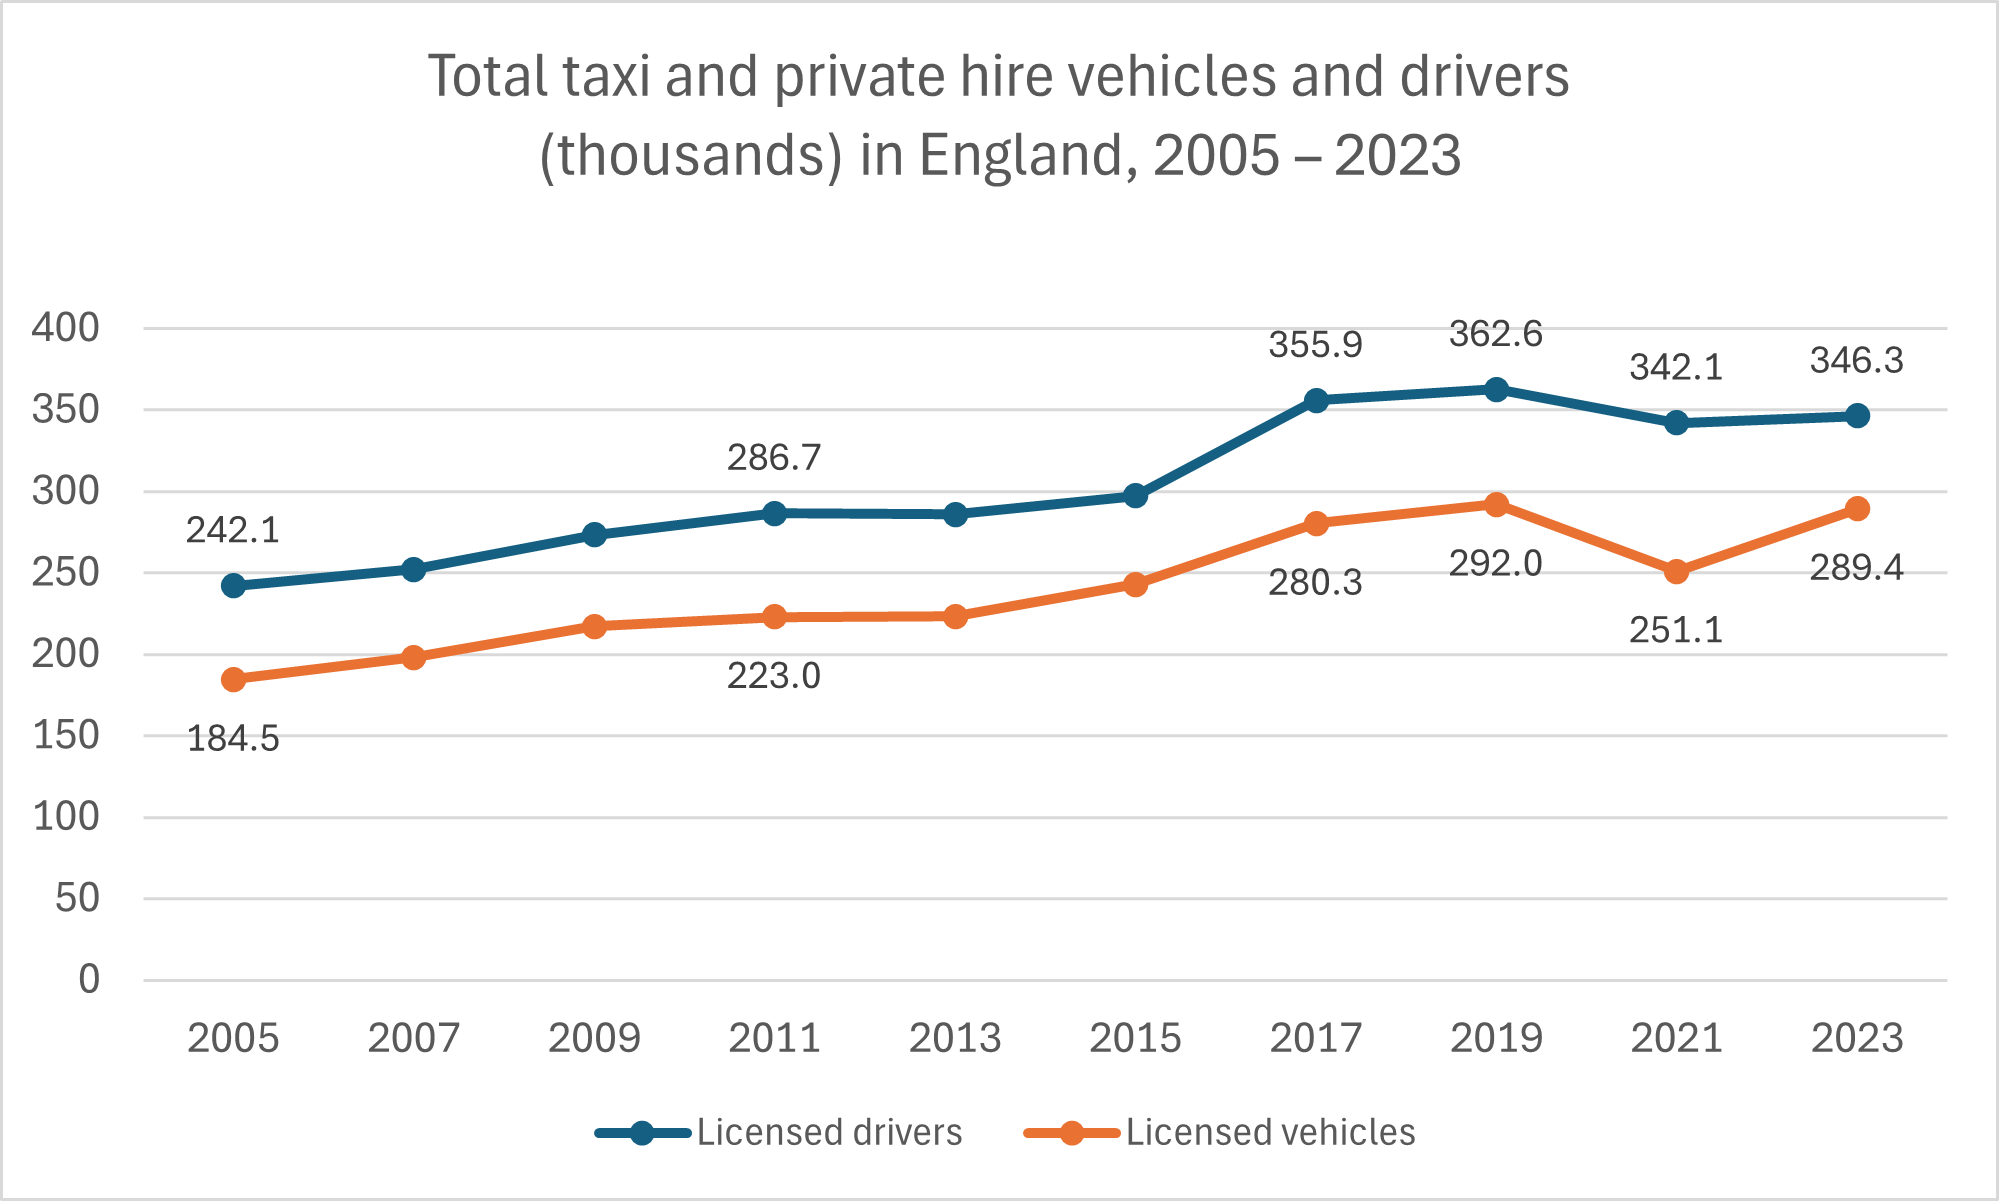 taxi drivers and taxi vehicles, 2005 to 2023